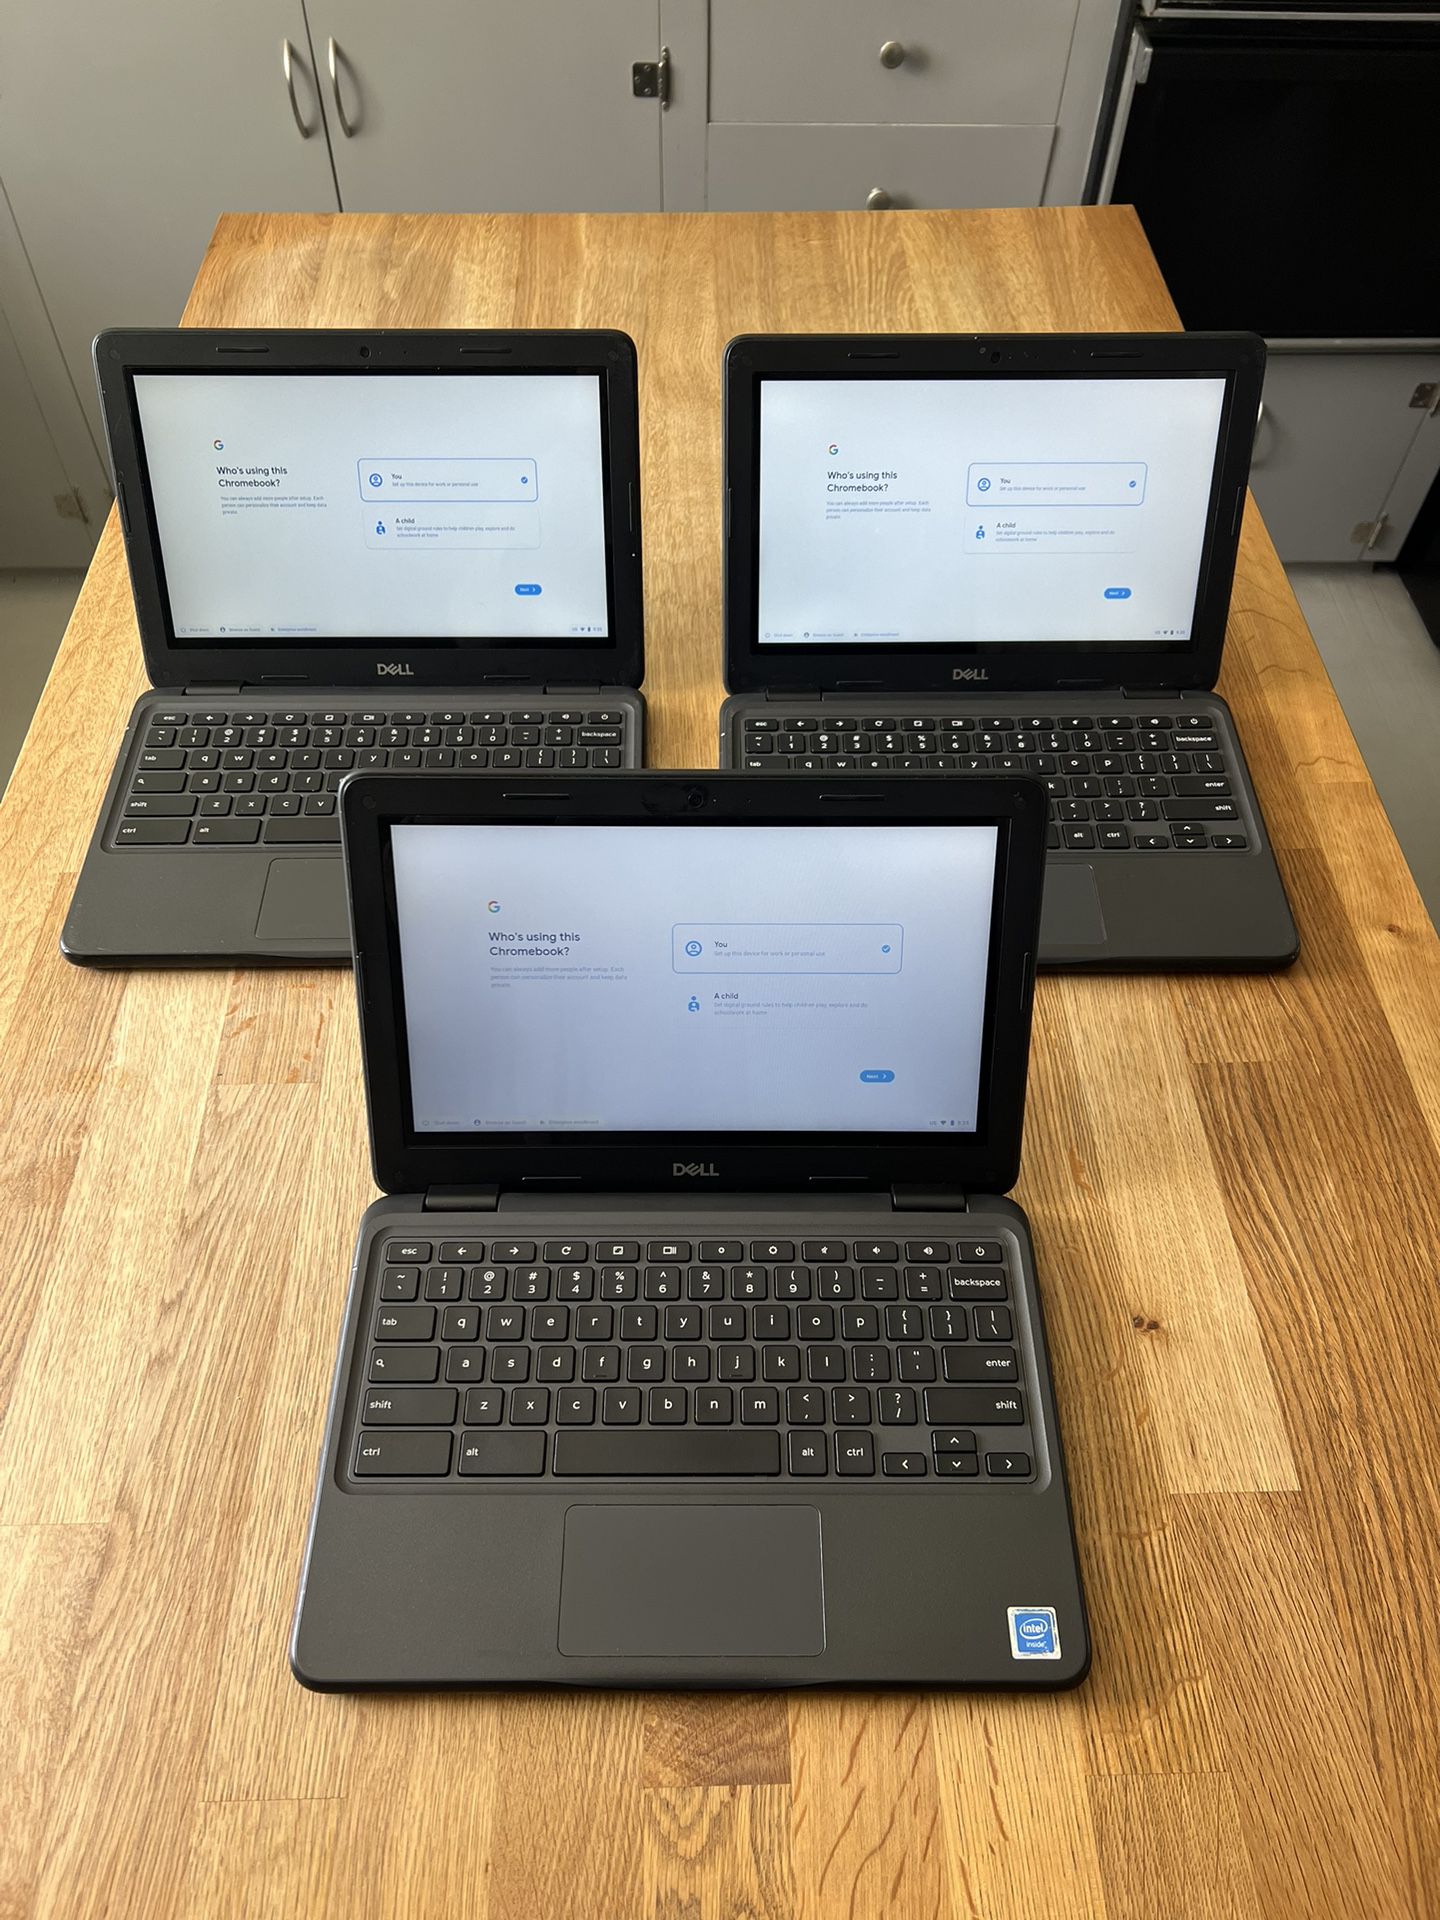 2018 Touchscreen Dell ChromeBook 5190 Laptops - 3 Available / $30 Each